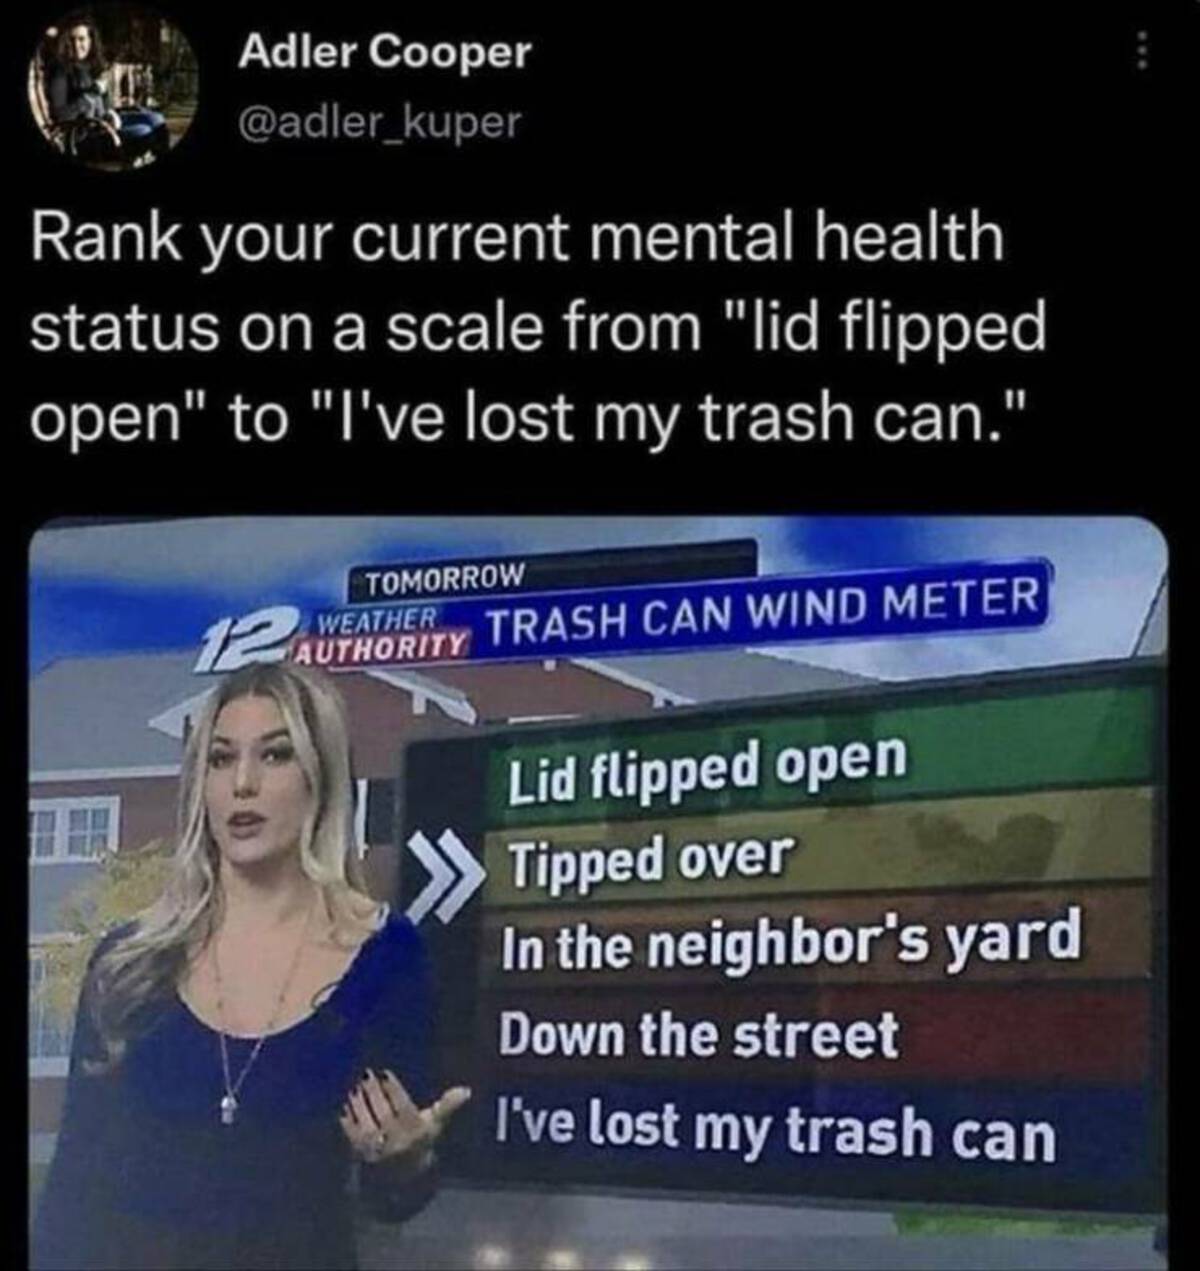 media - Adler Cooper Rank your current mental health status on a scale from "lid flipped open" to "I've lost my trash can." Tomorrow 12 Weatherty Trash Can Wind Meter Lid flipped open Tipped over In the neighbor's yard Down the street I've lost my trash c